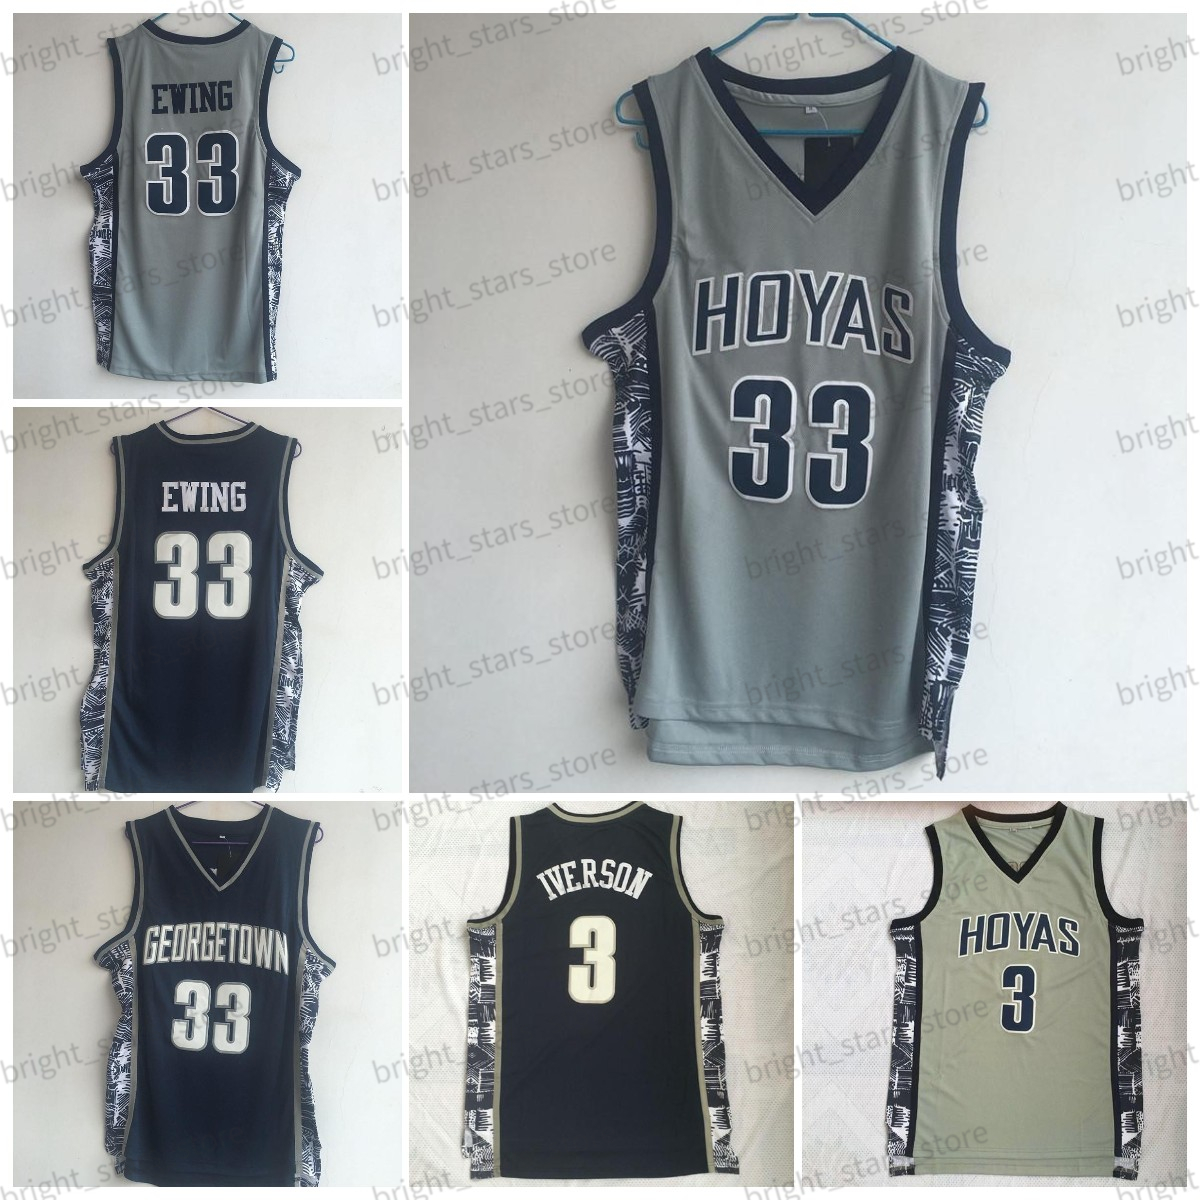 

3 Allen Iverson 33 Patrick Ewing Basketball Jersey Georgetown Hoyas NCAA University College Mens Grey Jerseys Stitched Good Quality, #3 iverson (colour 2)